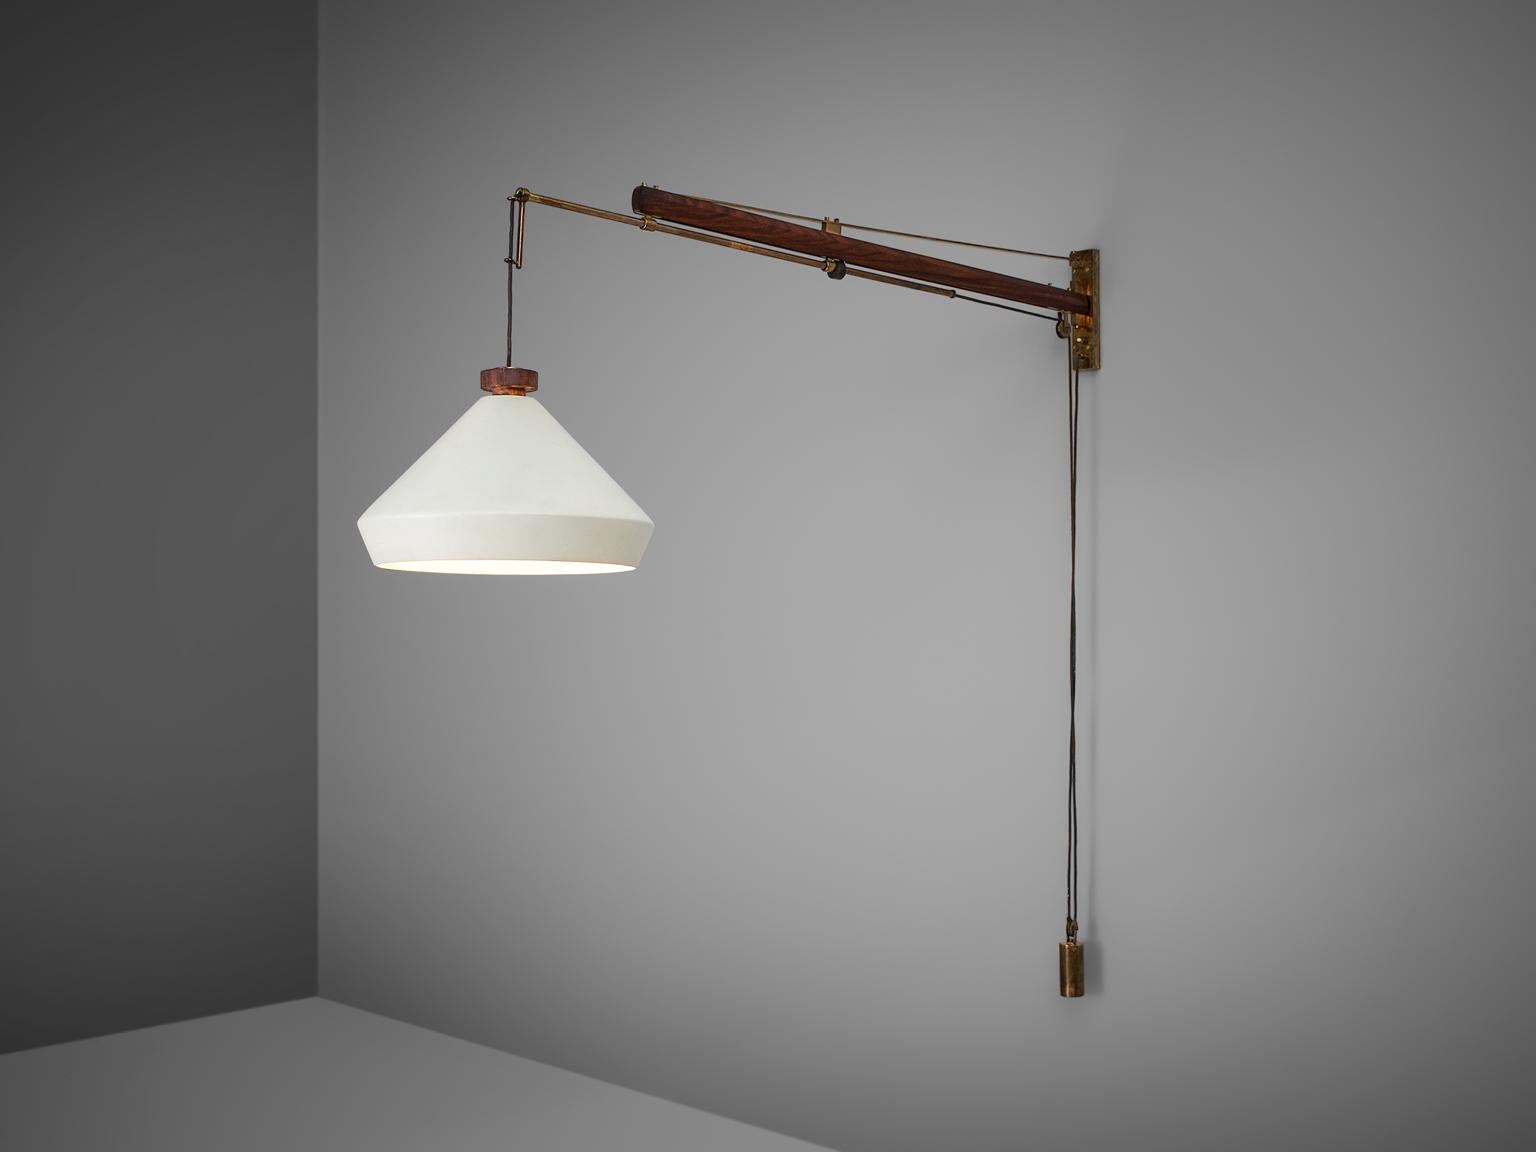 Tito Agnoli for O-Luce, wall light, white laquered metal, palissander, cord and brass, Italy, circa 1950. 

Industrial wall light designed by Tit Agnoli, and manufactured by O-Luce in circa 1950. This lamp is made of palissander, lacquered metal